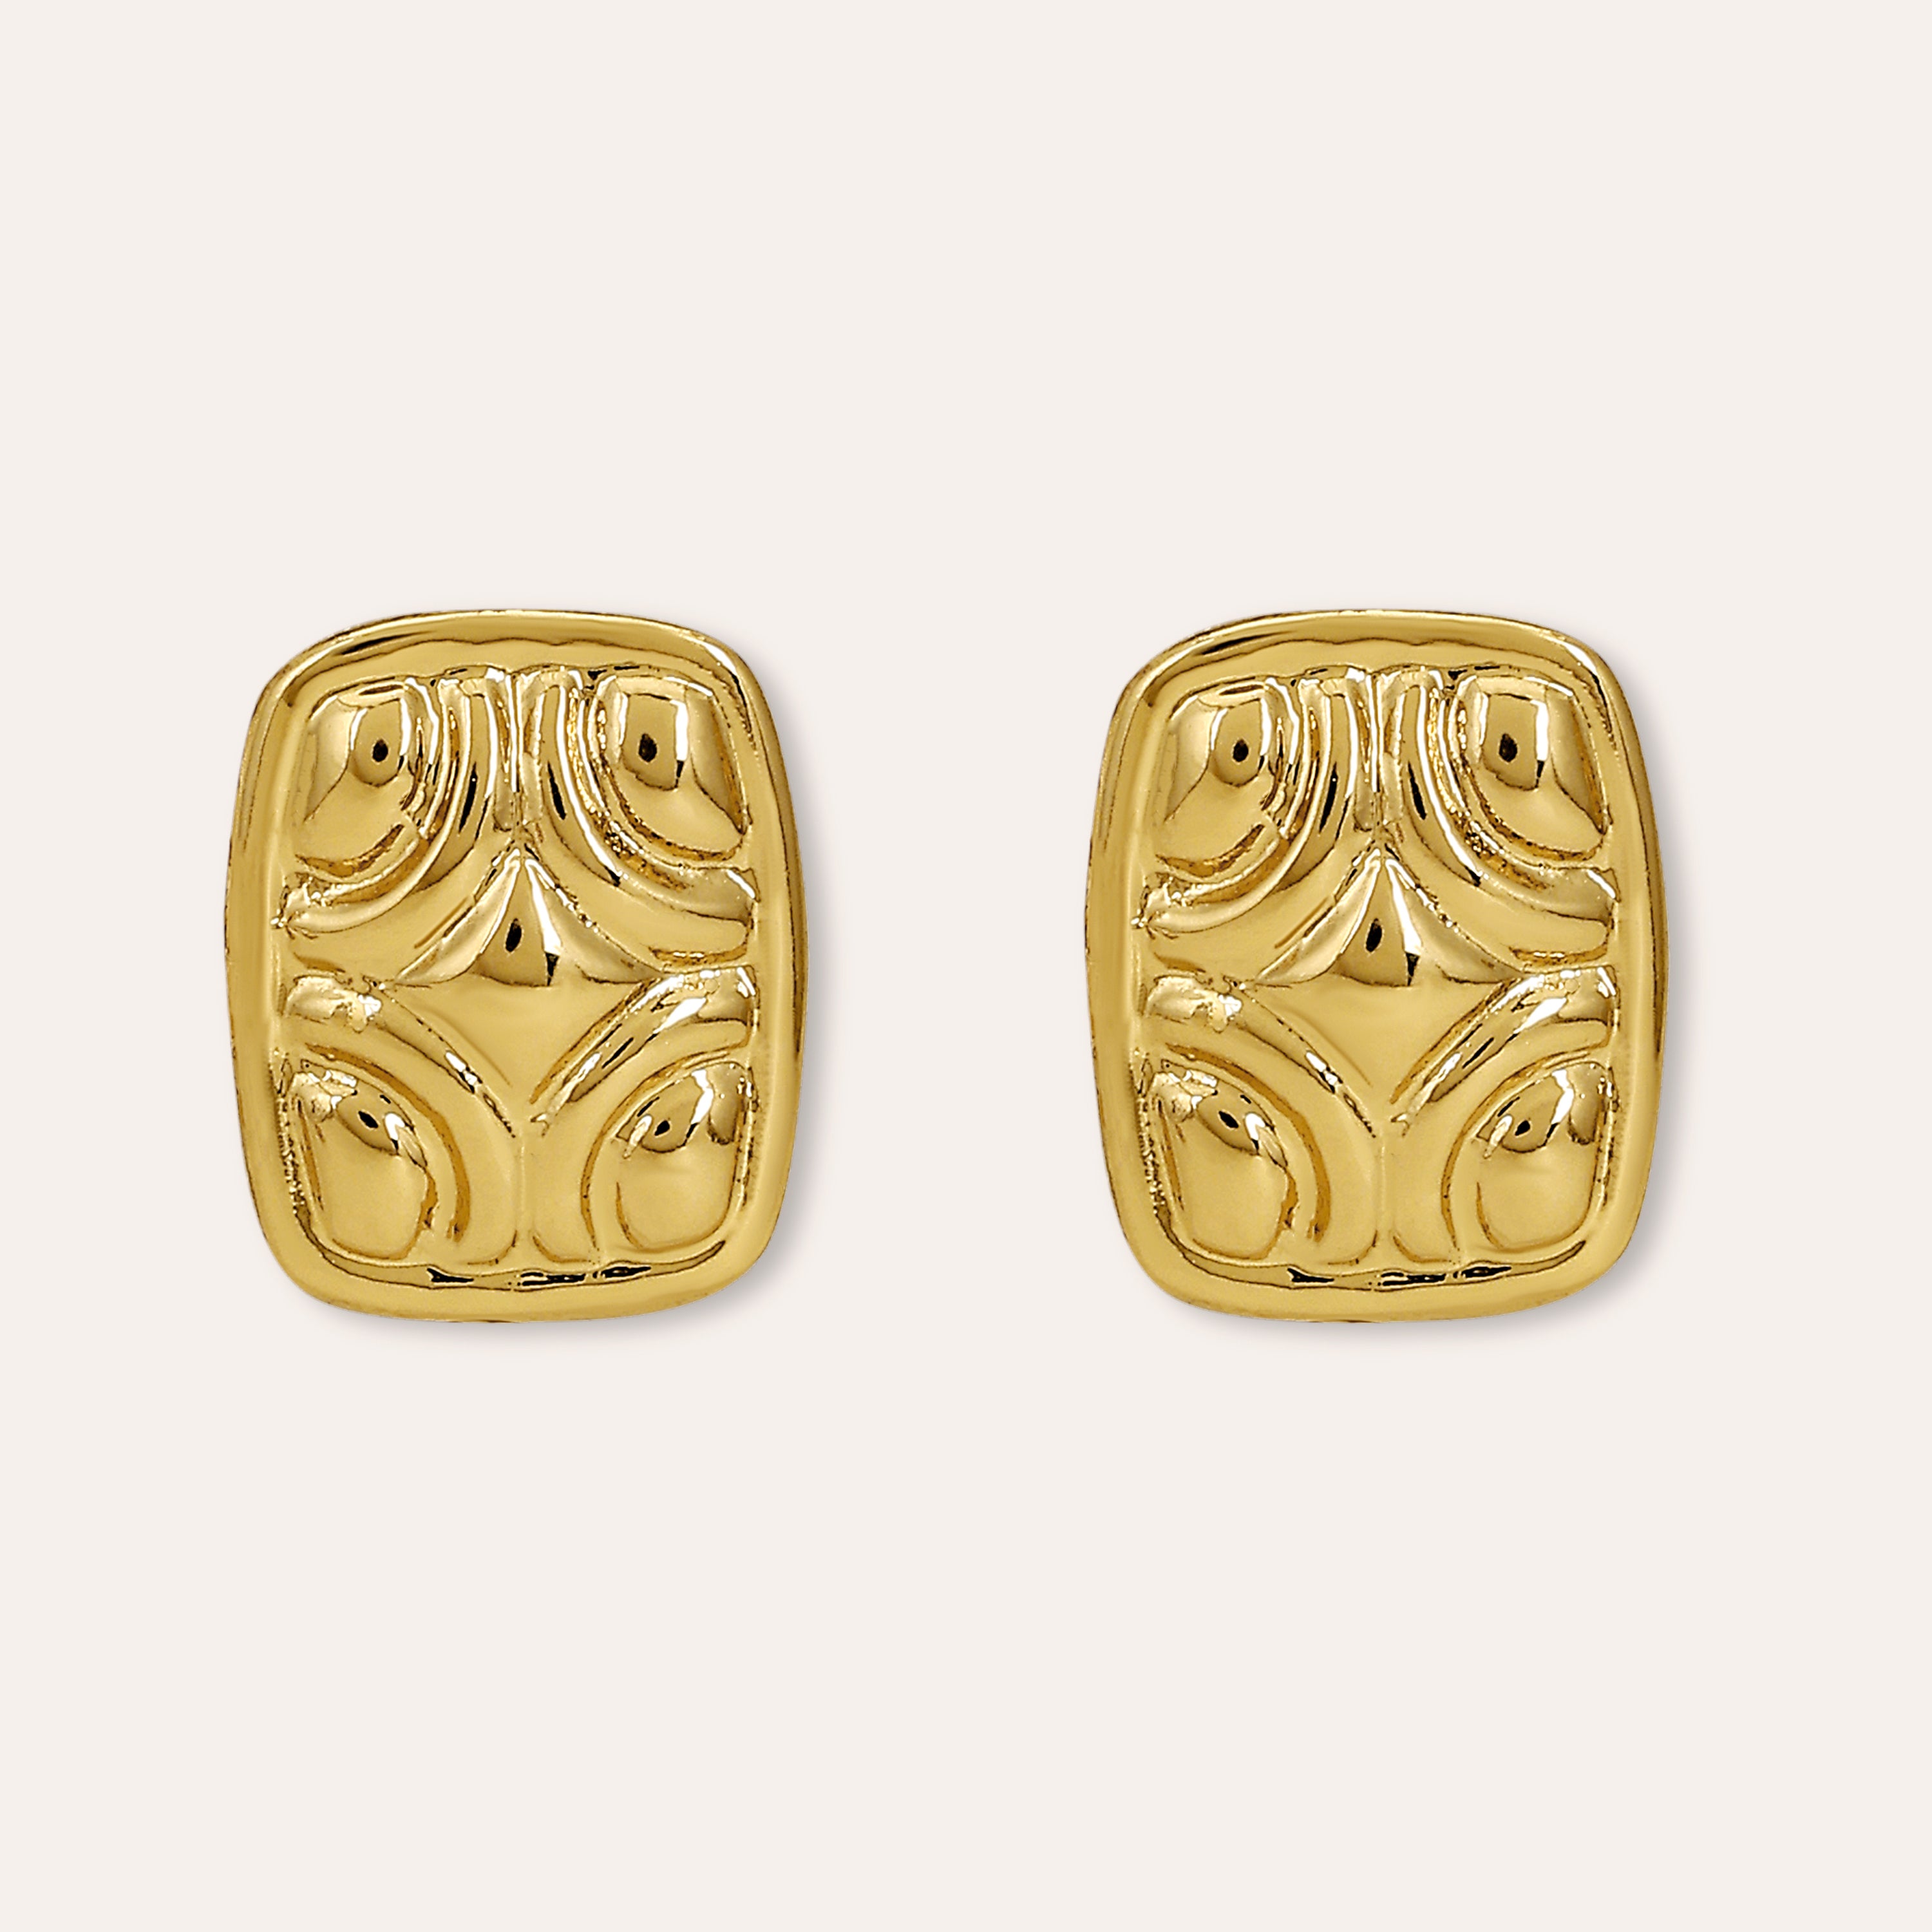 TFC Italian Pattern Gold Plated stud Earrings- Discover daily wear gold earrings including stud earrings, hoop earrings, and pearl earrings, perfect as earrings for women and earrings for girls.Find the cheapest fashion jewellery which is anti-tarnis​h only at The Fun company